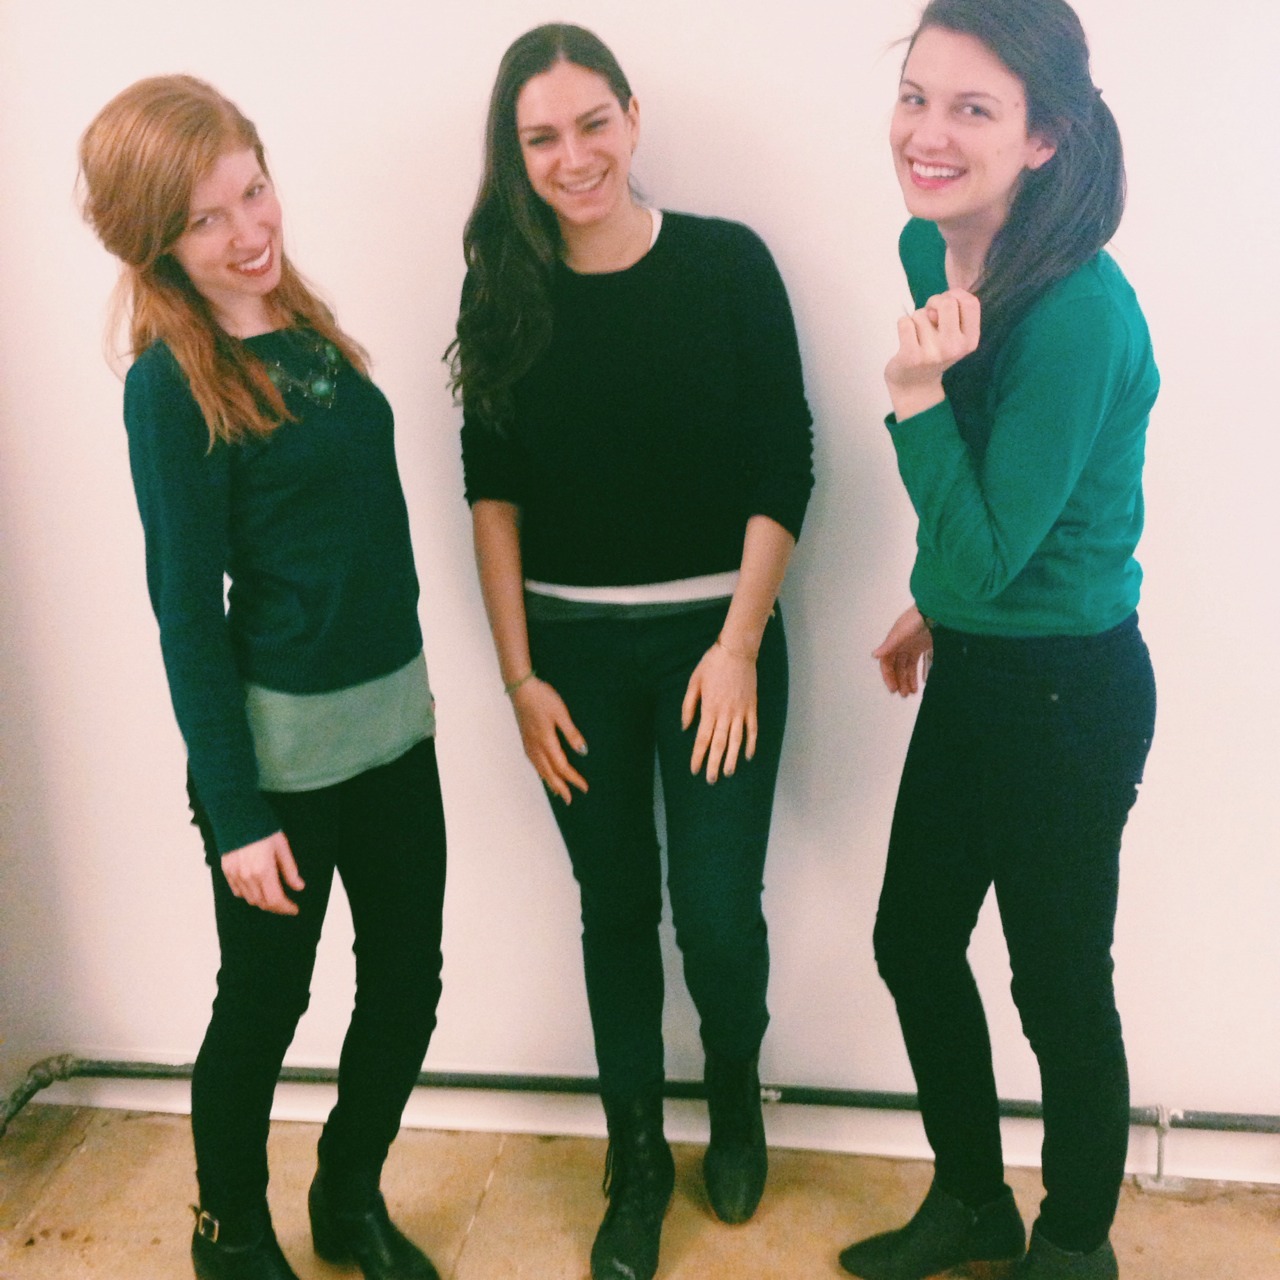 We may have started celebrating St Patrick’s Day a little early in the office. Ps. For the record Jenna’s pants are green.